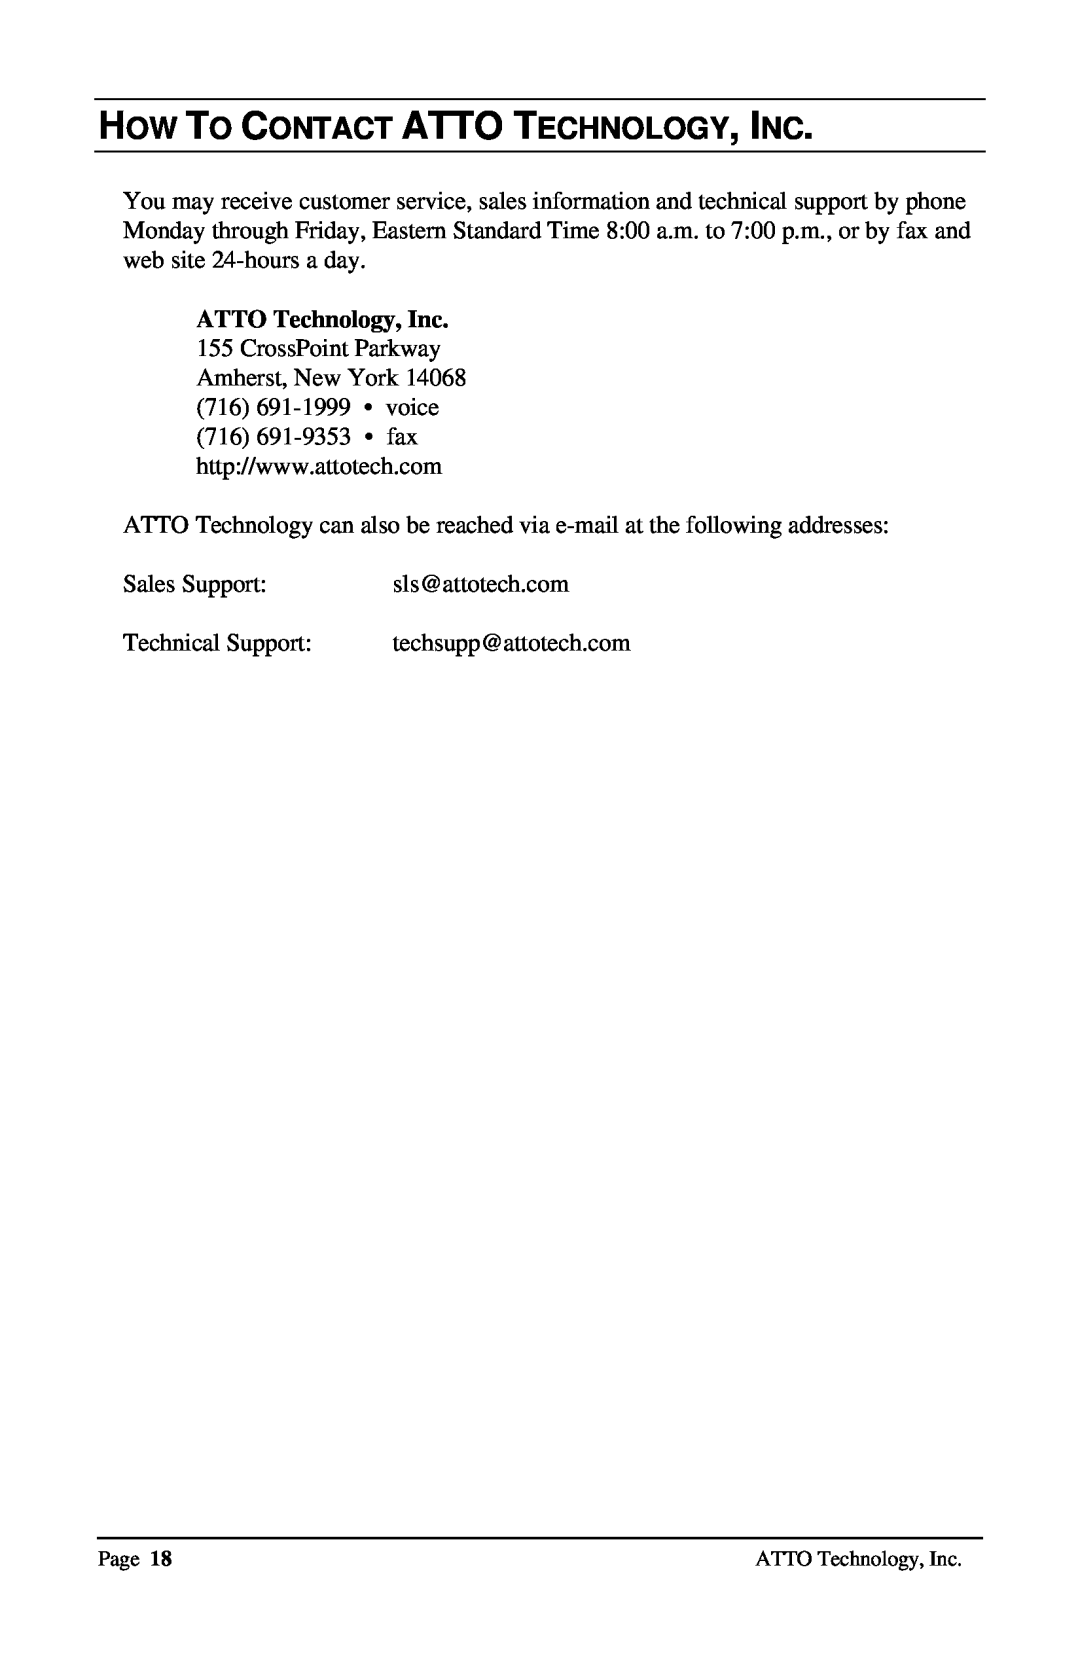 ATTO Technology UL2D, UL25 user manual How To Contact Atto Technology, Inc, ATTO Technology, Inc 